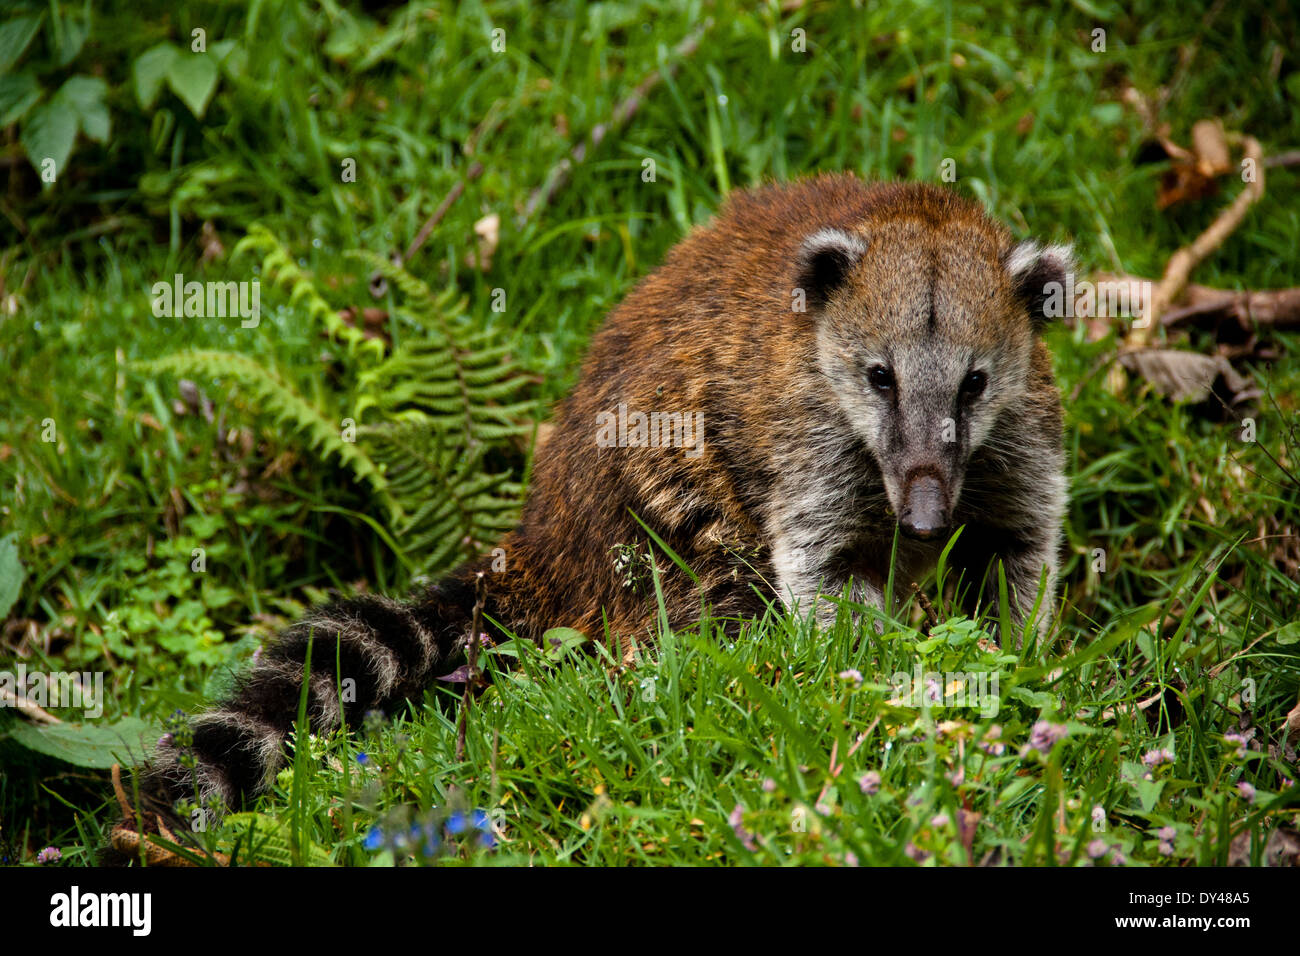 Coati at the Cocora valley, Colombia Stock Photo